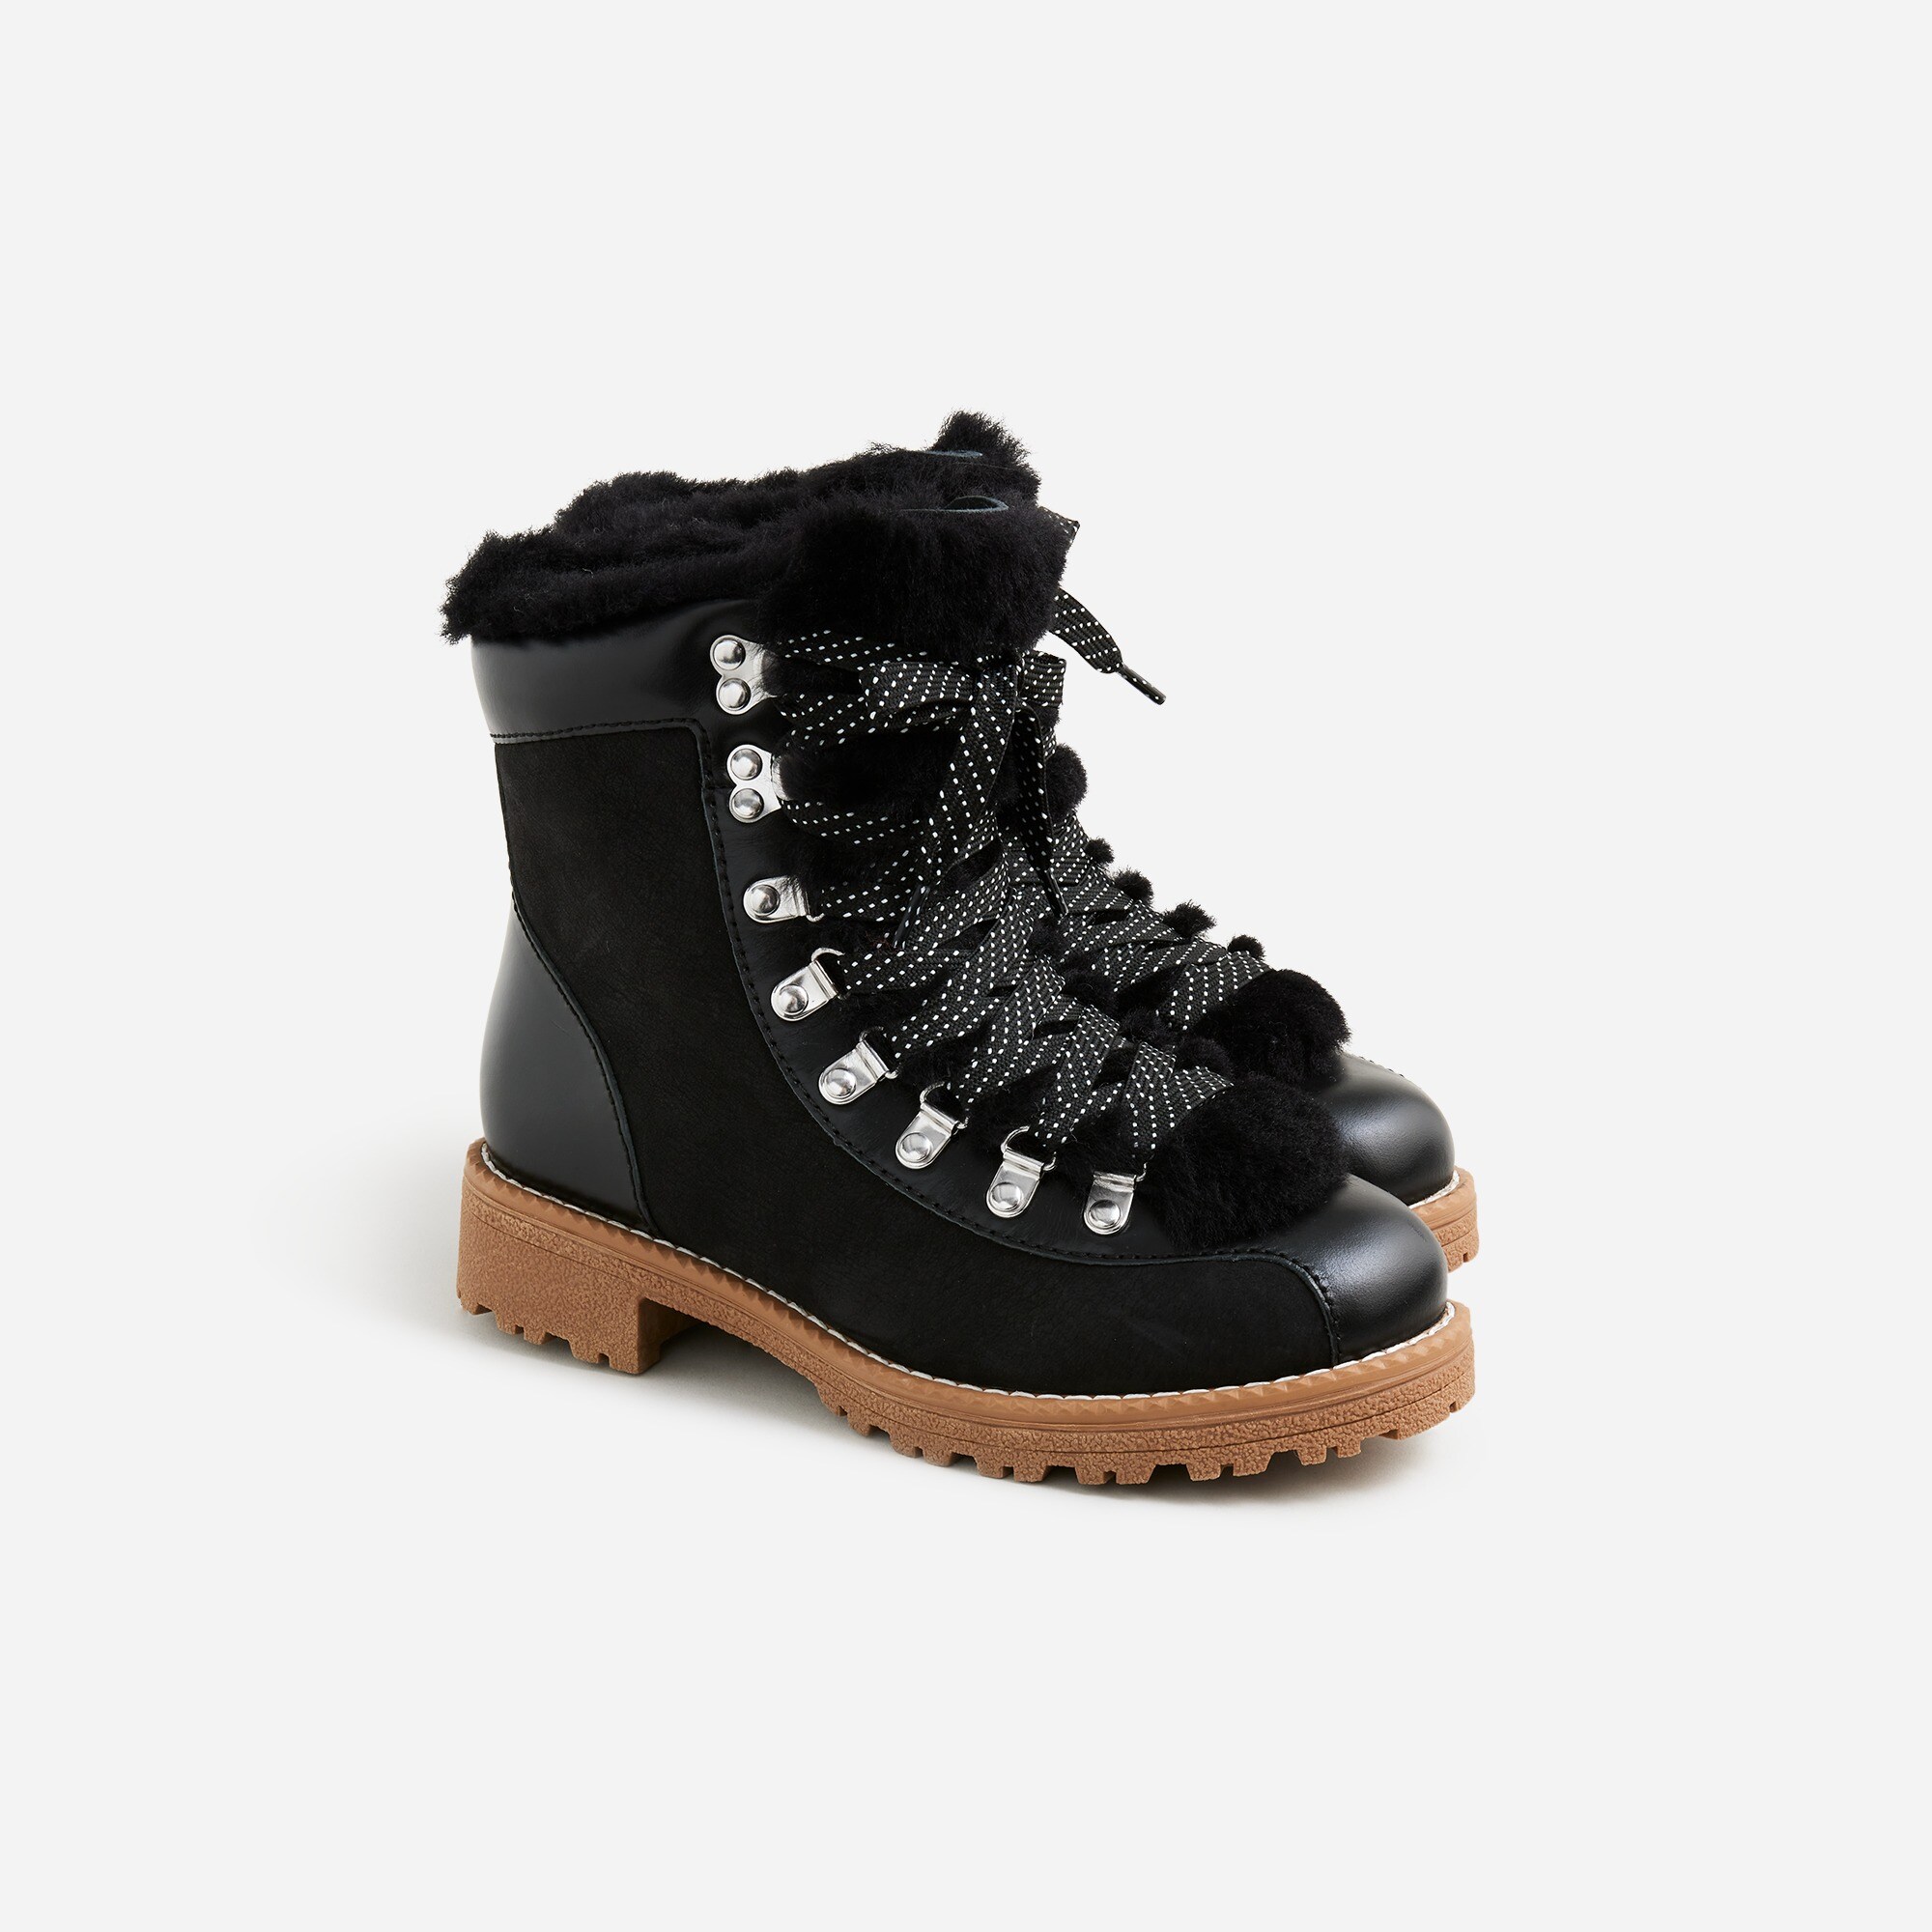  New Nordic boots in leather and nubuck